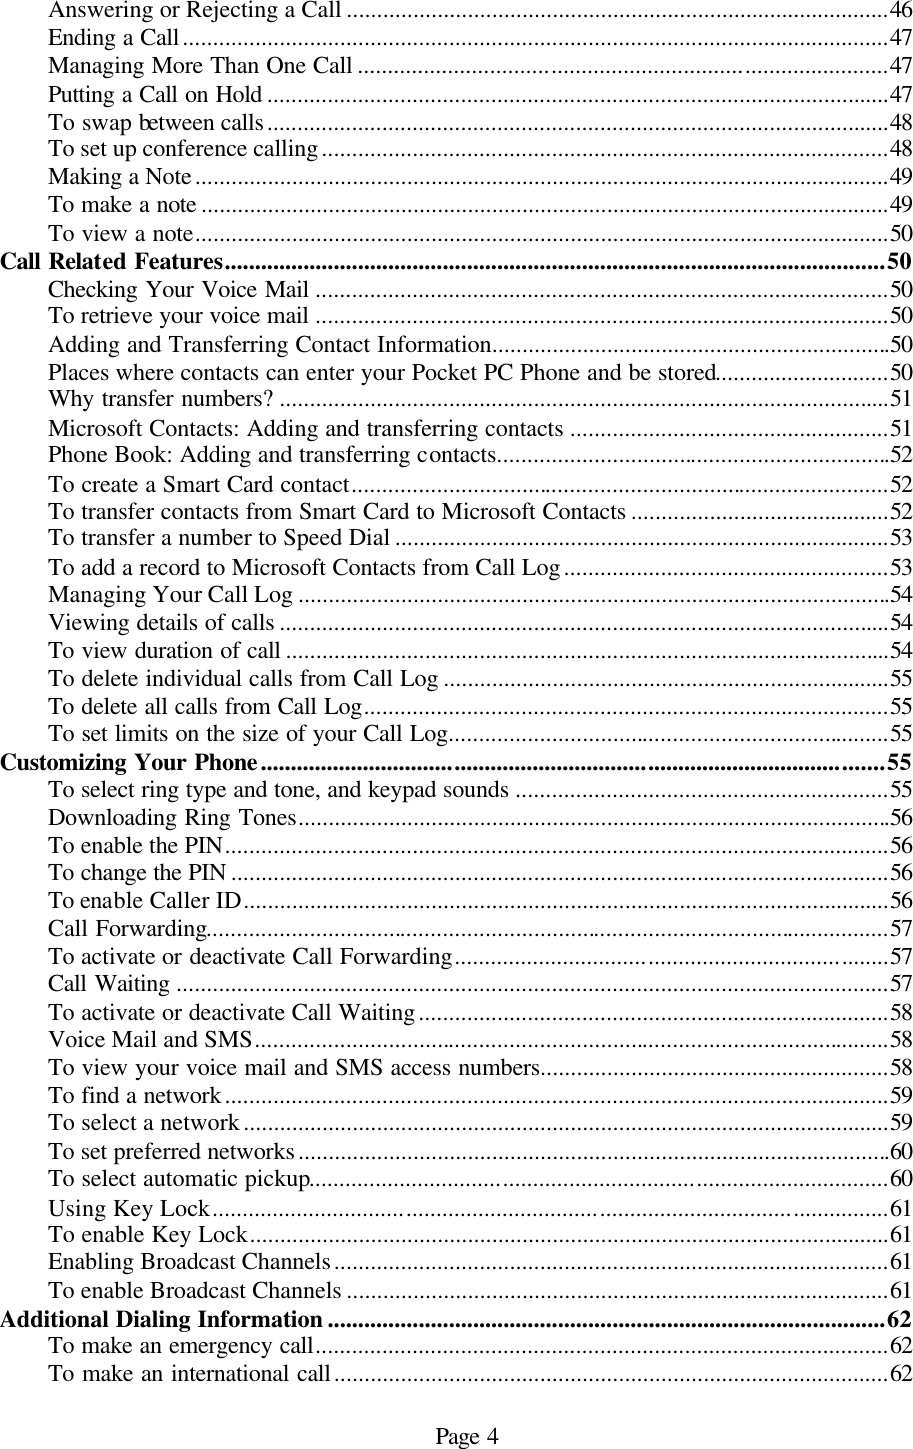 Page 4 Answering or Rejecting a Call ..........................................................................................46 Ending a Call.....................................................................................................................47 Managing More Than One Call ........................................................................................47 Putting a Call on Hold .......................................................................................................47 To swap between calls.......................................................................................................48 To set up conference calling..............................................................................................48 Making a Note...................................................................................................................49 To make a note ..................................................................................................................49 To view a note...................................................................................................................50 Call Related Features.............................................................................................................50 Checking Your Voice Mail ...............................................................................................50 To retrieve your voice mail ...............................................................................................50 Adding and Transferring Contact Information..................................................................50 Places where contacts can enter your Pocket PC Phone and be stored.............................50 Why transfer numbers? .....................................................................................................51 Microsoft Contacts: Adding and transferring contacts .....................................................51 Phone Book: Adding and transferring contacts.................................................................52 To create a Smart Card contact.........................................................................................52 To transfer contacts from Smart Card to Microsoft Contacts ...........................................52 To transfer a number to Speed Dial ..................................................................................53 To add a record to Microsoft Contacts from Call Log......................................................53 Managing Your Call Log ..................................................................................................54 Viewing details of calls .....................................................................................................54 To view duration of call ....................................................................................................54 To delete individual calls from Call Log ..........................................................................55 To delete all calls from Call Log.......................................................................................55 To set limits on the size of your Call Log.........................................................................55 Customizing Your Phone.......................................................................................................55 To select ring type and tone, and keypad sounds ..............................................................55 Downloading Ring Tones..................................................................................................56 To enable the PIN..............................................................................................................56 To change the PIN .............................................................................................................56 To enable Caller ID...........................................................................................................56 Call Forwarding.................................................................................................................57 To activate or deactivate Call Forwarding........................................................................57 Call Waiting ......................................................................................................................57 To activate or deactivate Call Waiting..............................................................................58 Voice Mail and SMS.........................................................................................................58 To view your voice mail and SMS access numbers..........................................................58 To find a network..............................................................................................................59 To select a network...........................................................................................................59 To set preferred networks..................................................................................................60 To select automatic pickup................................................................................................60 Using Key Lock................................................................................................................61 To enable Key Lock..........................................................................................................61 Enabling Broadcast Channels............................................................................................61 To enable Broadcast Channels ..........................................................................................61 Additional Dialing Information ............................................................................................62 To make an emergency call...............................................................................................62 To make an international call............................................................................................62 